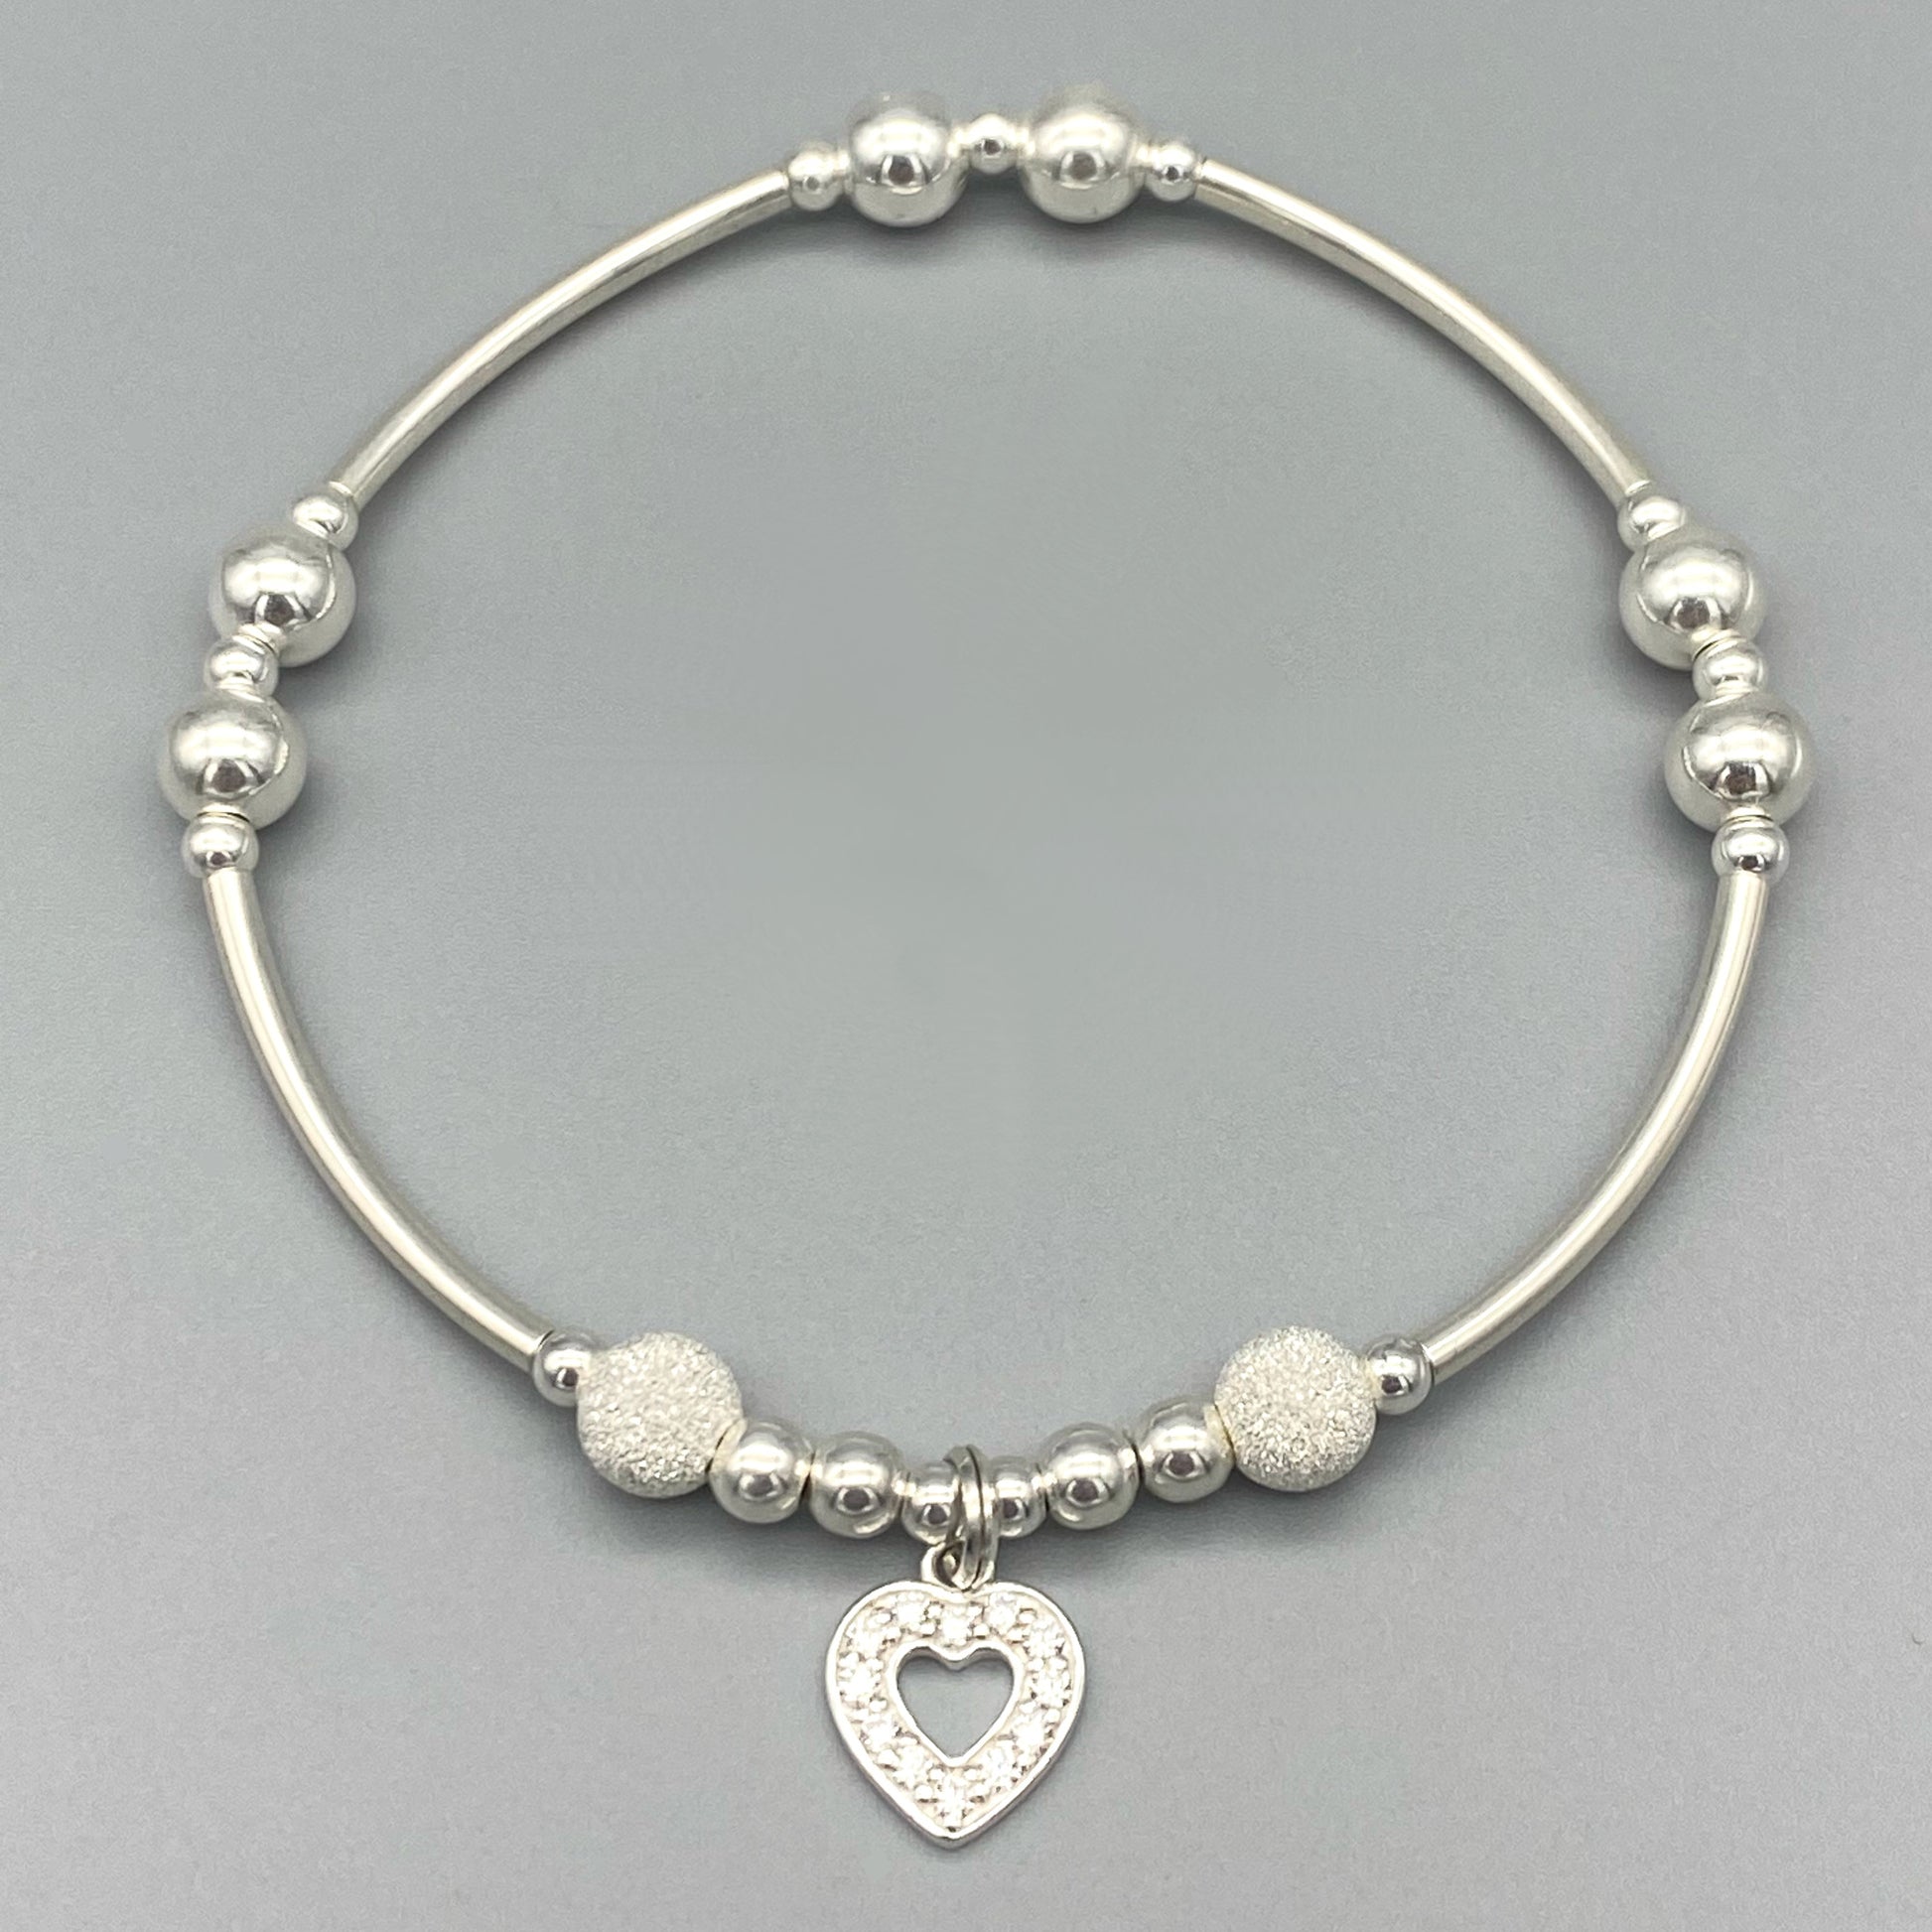 Diamond heart charm and starburst beads women's sterling silver stacking bracelet by My Silver Wish